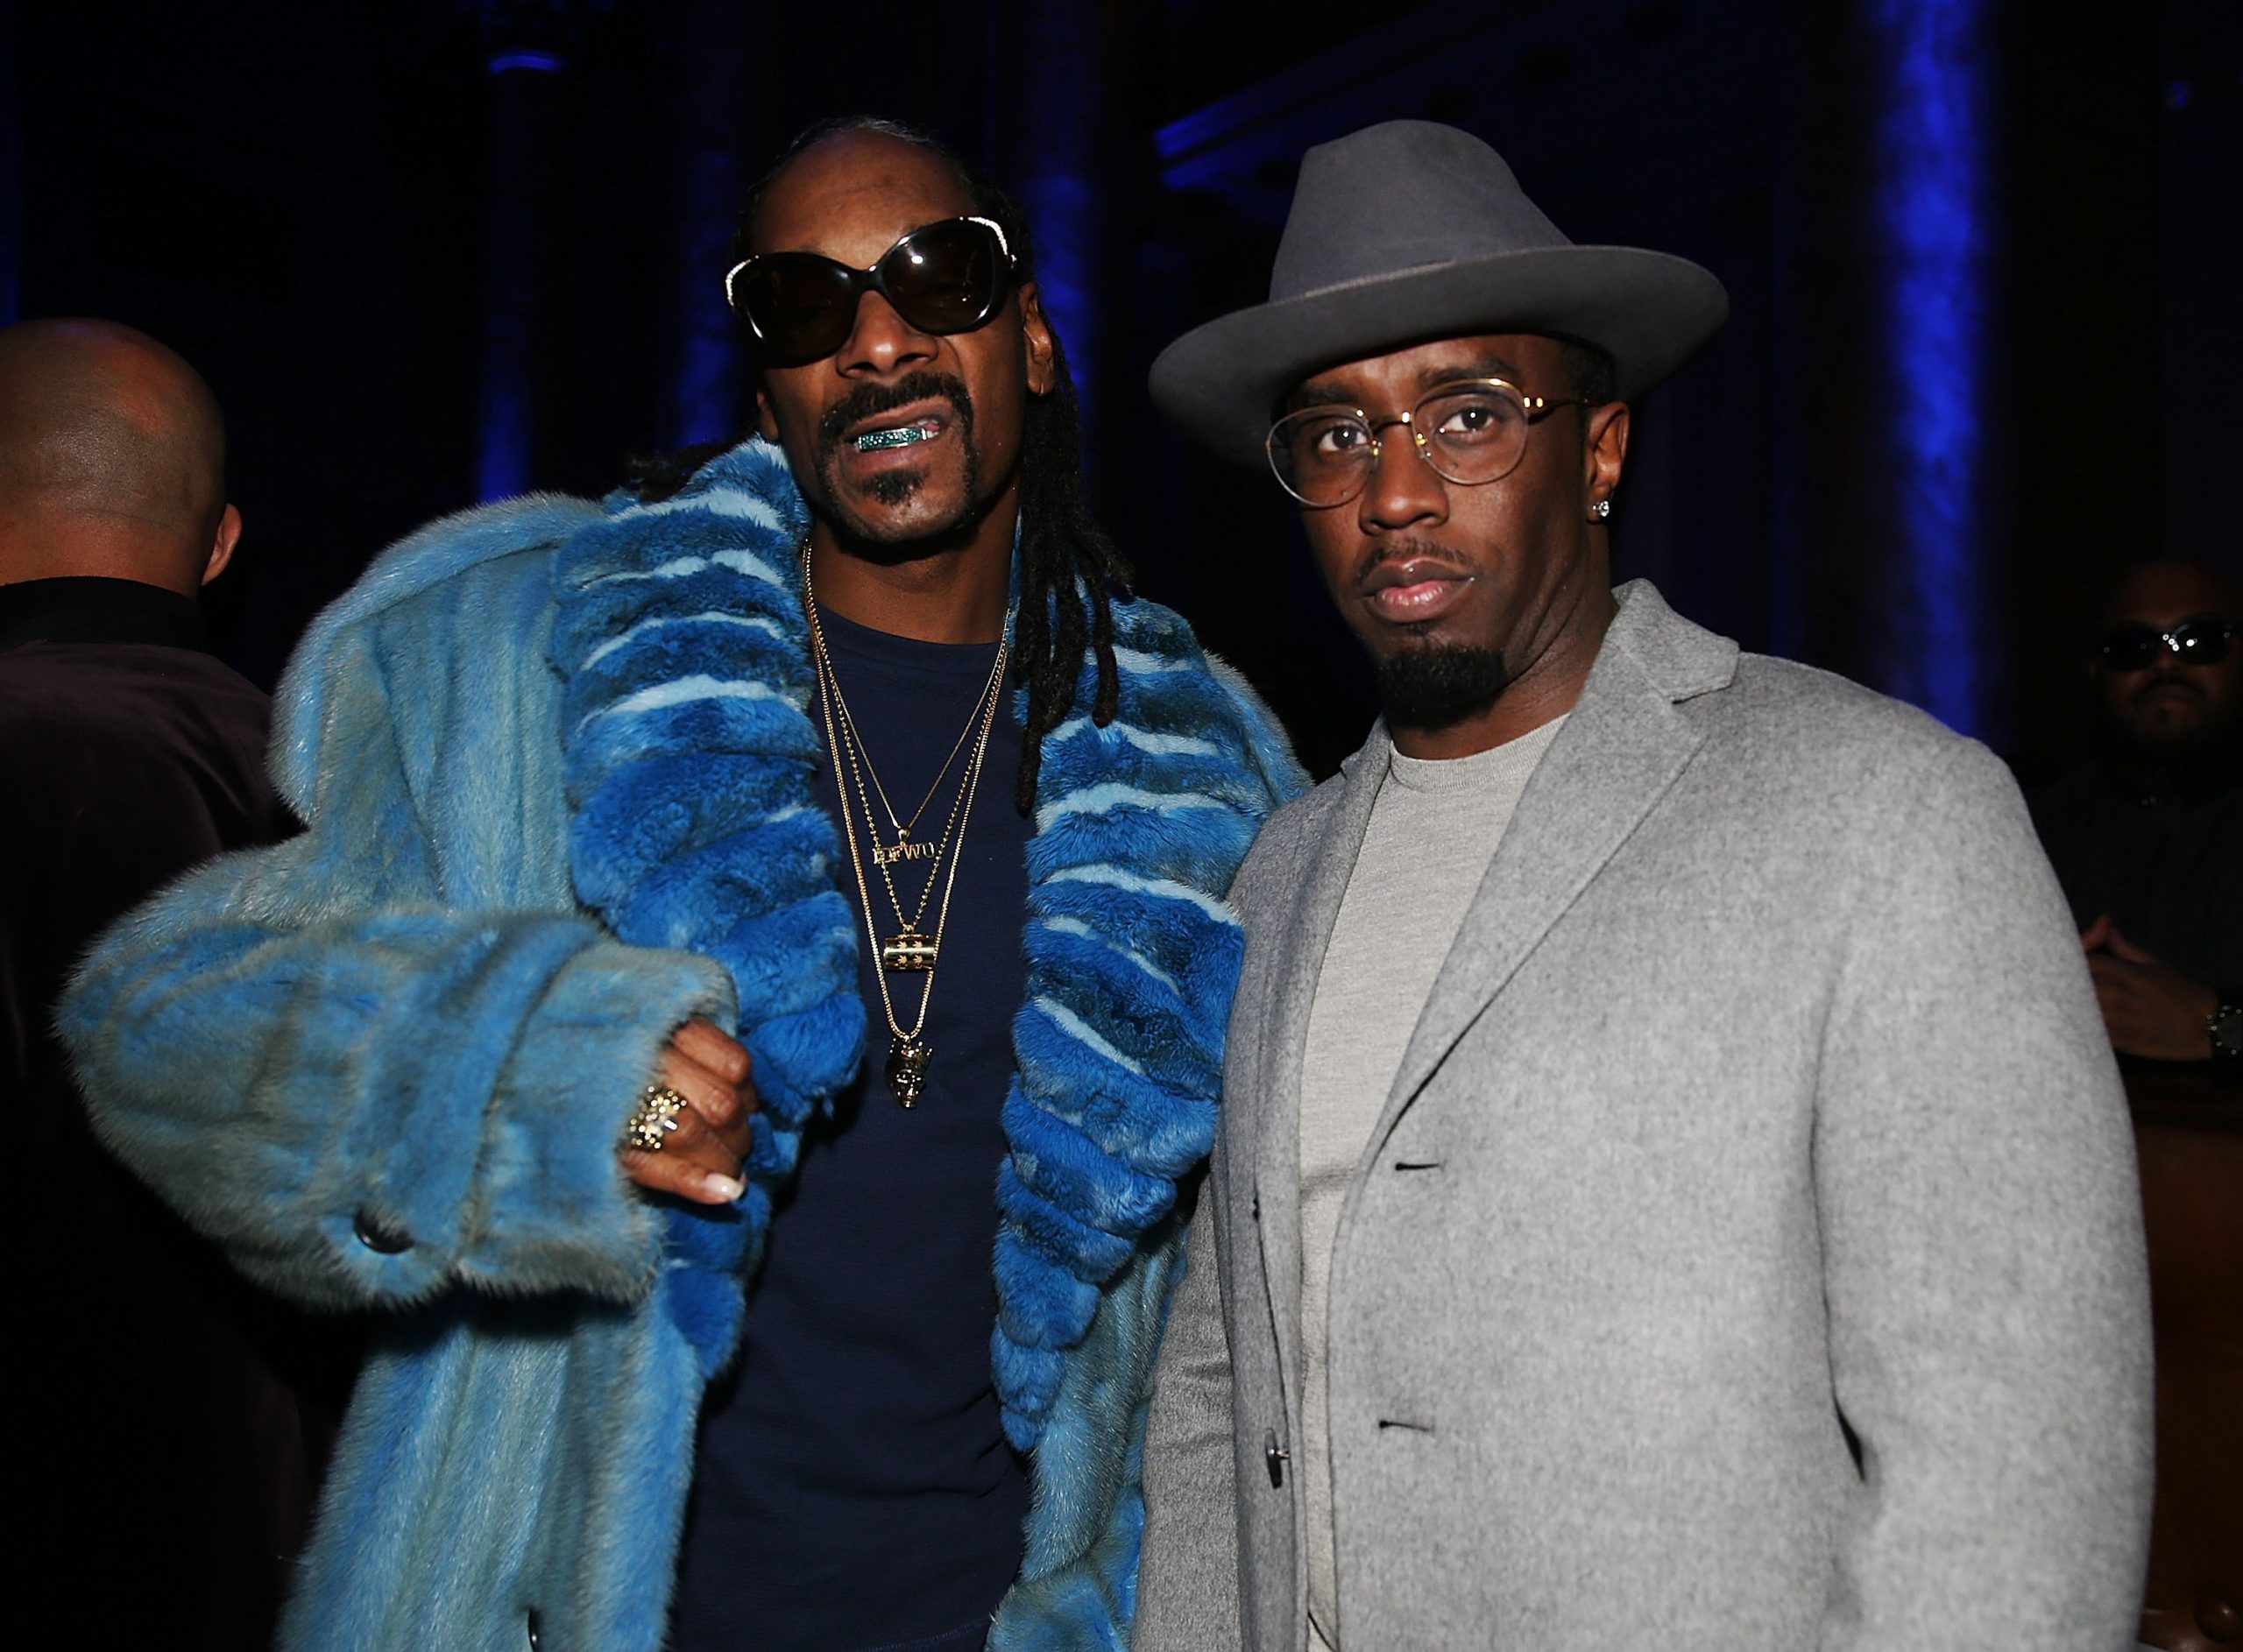 Snoop Dogg wearing blue and Diddy wearing a grey suit 